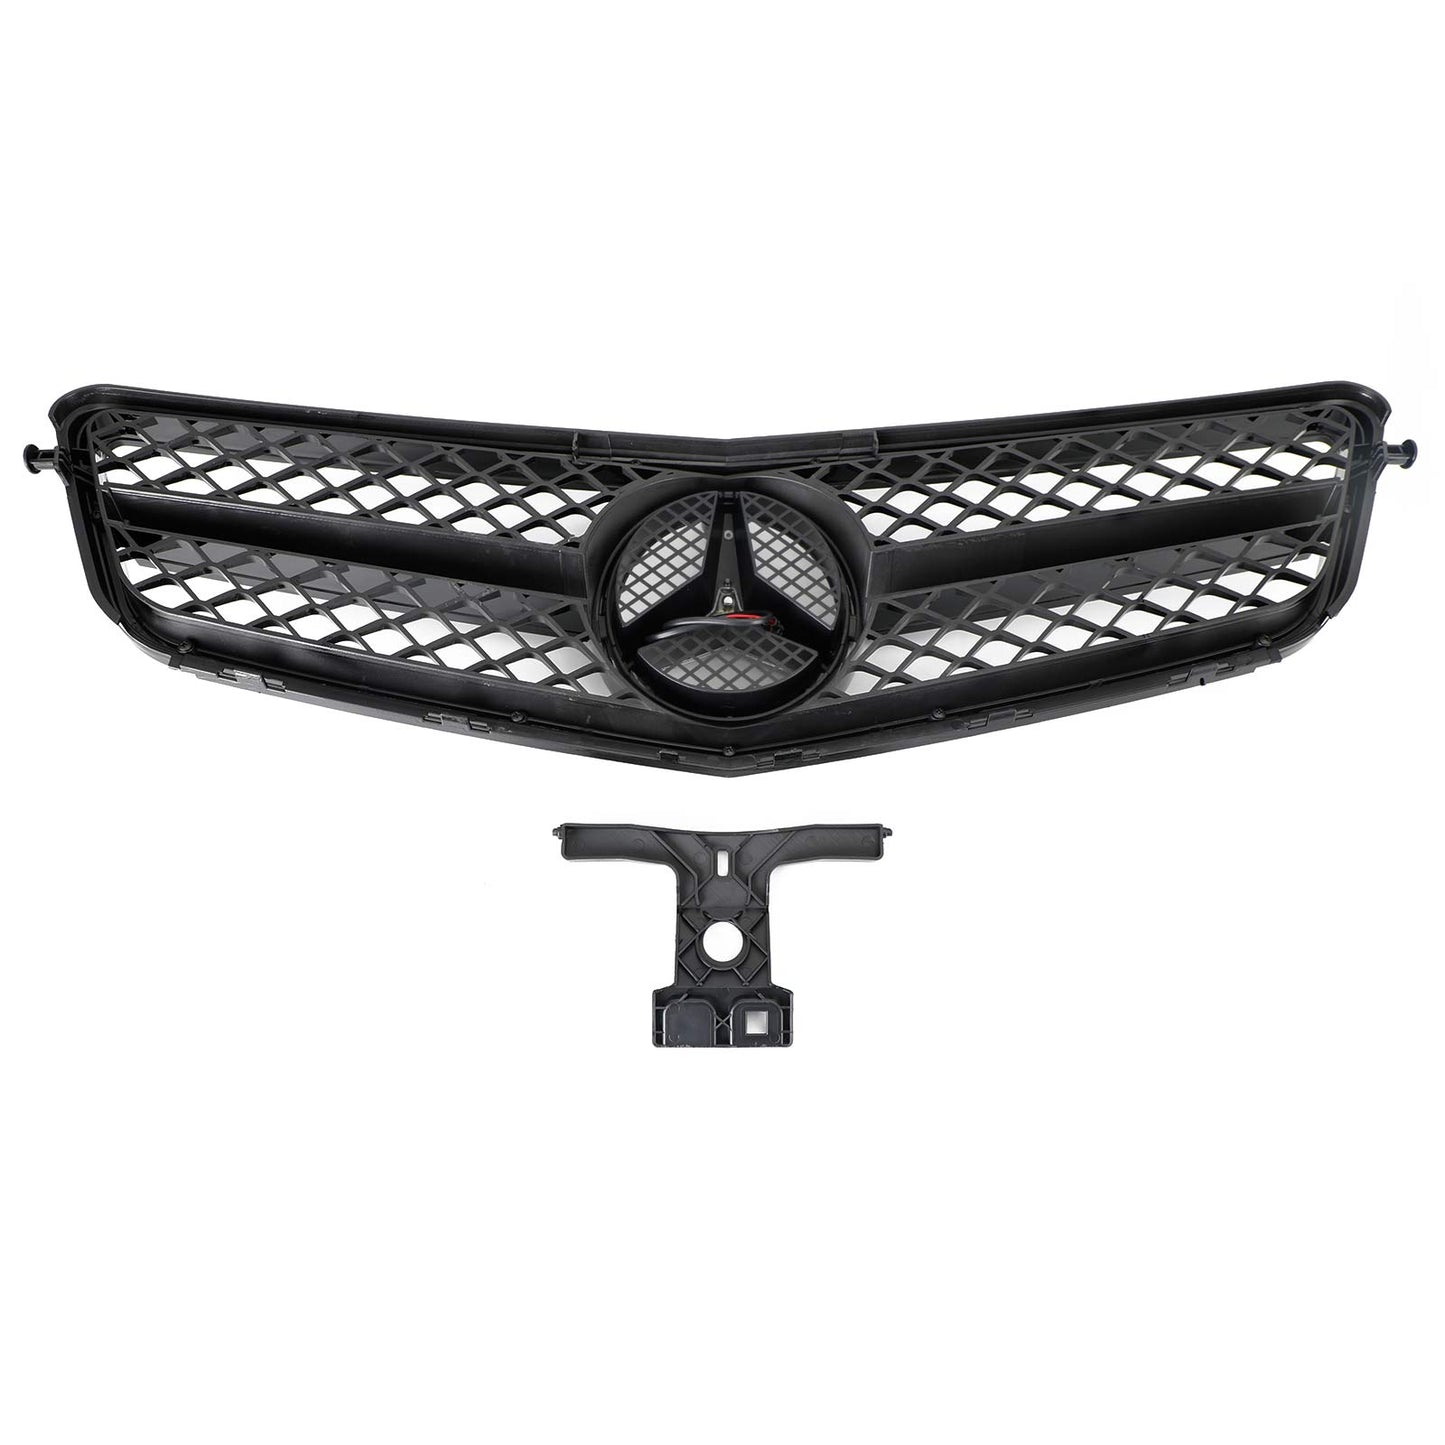 AMG W204 C-Class 2008-2014 Benz C300 C350 w/LED Front Bumper Car Grille Grill